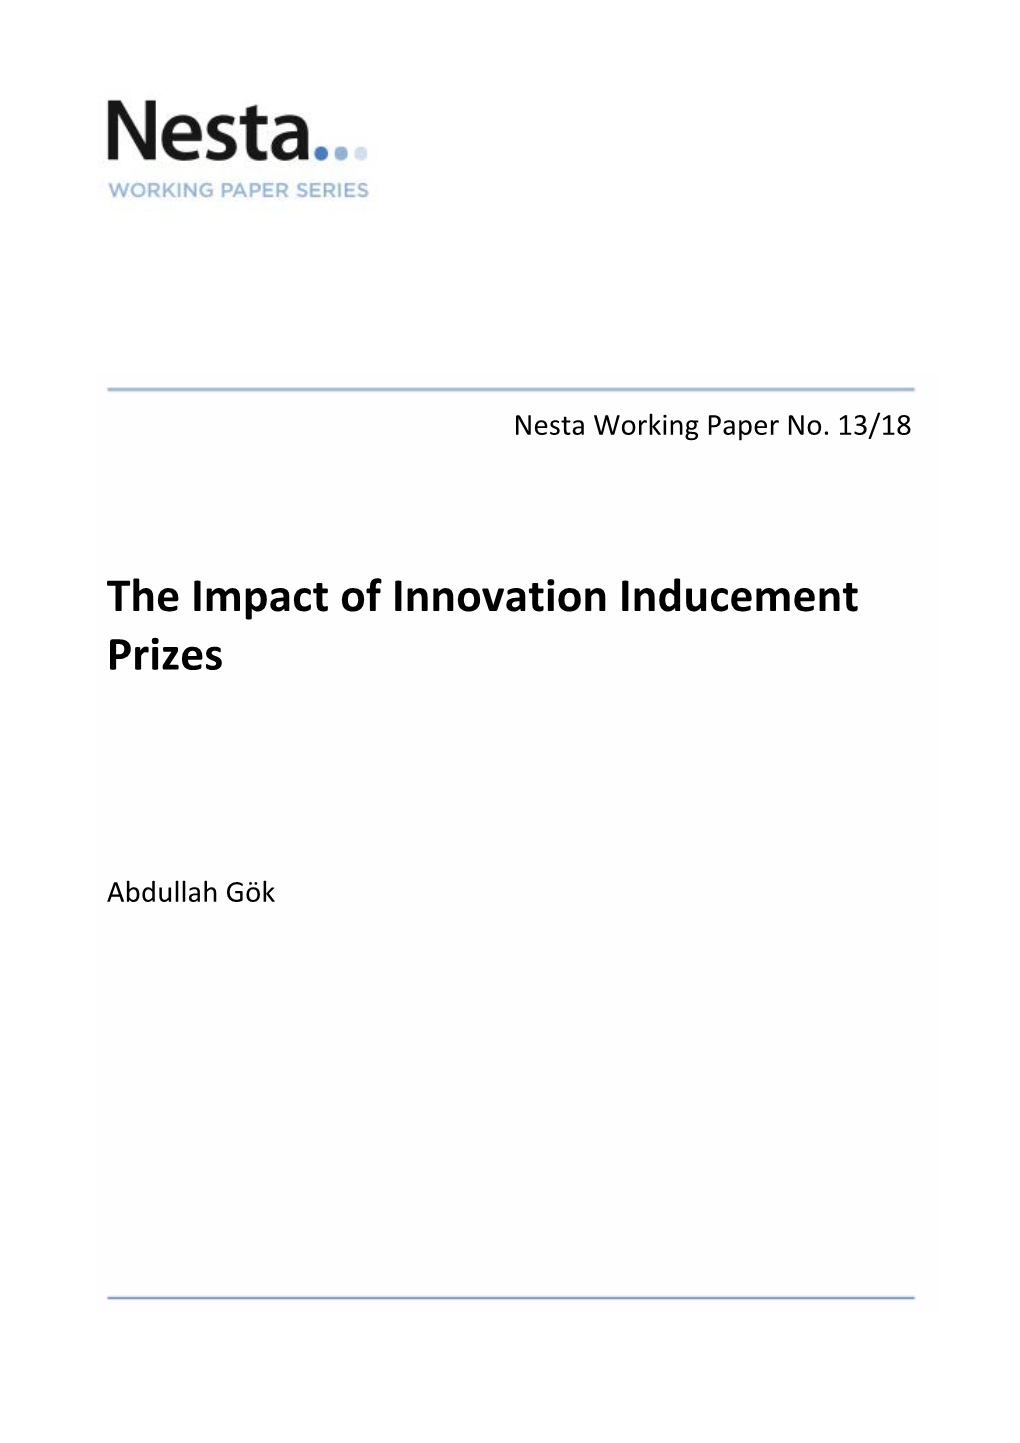 The Impact of Innovation Inducement Prizes